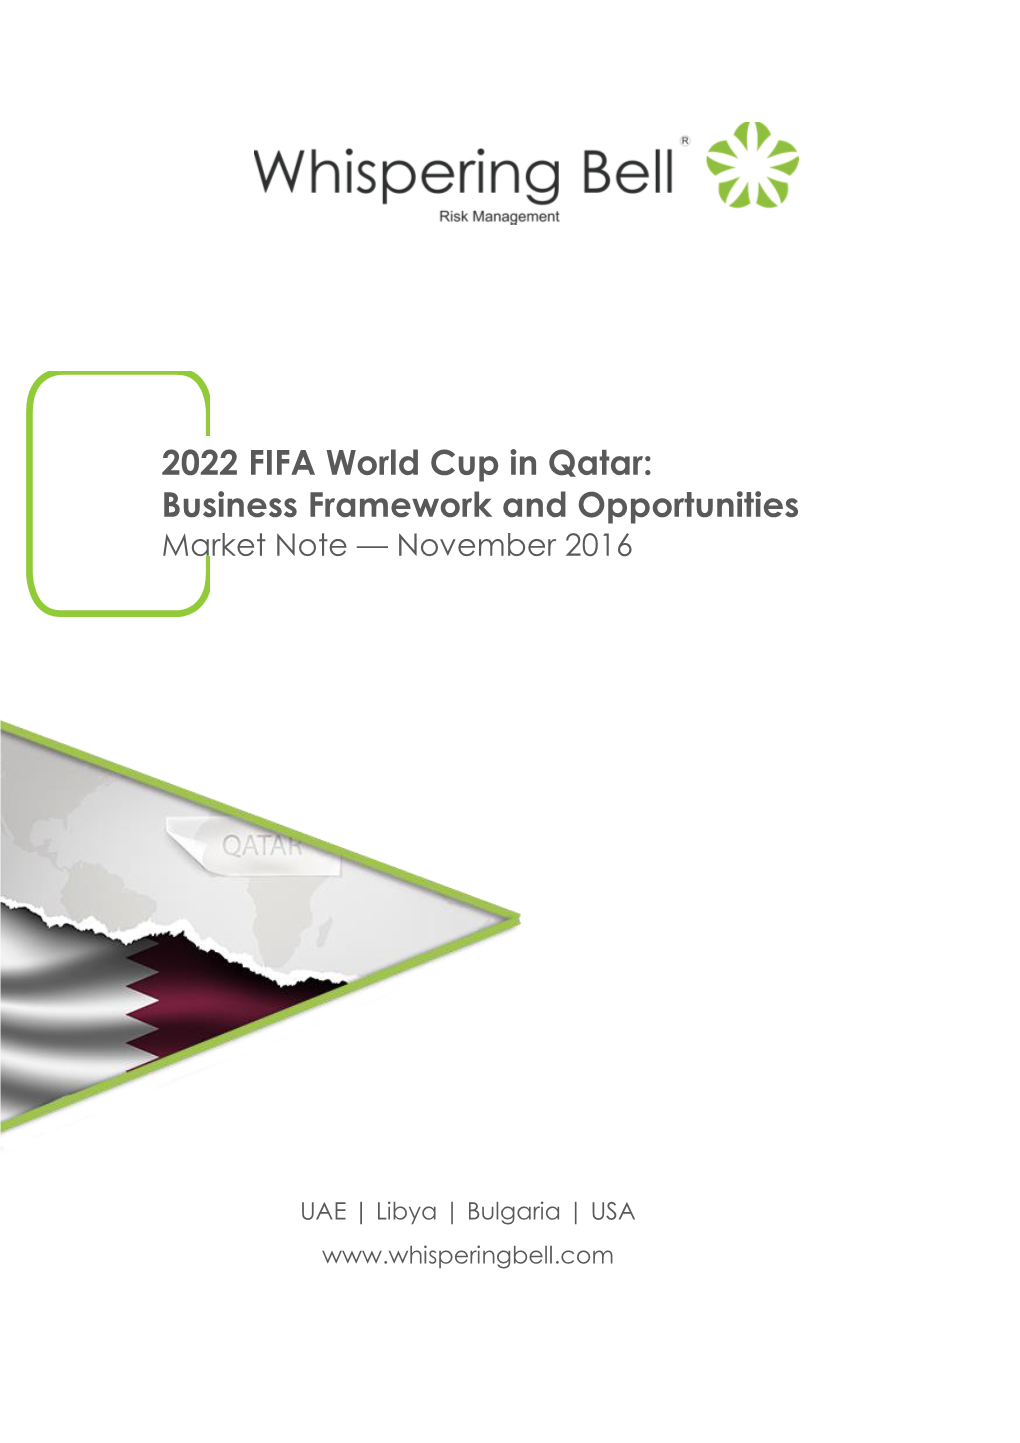 2022 FIFA World Cup in Qatar: Business Framework and Opportunities Market Note — November 2016